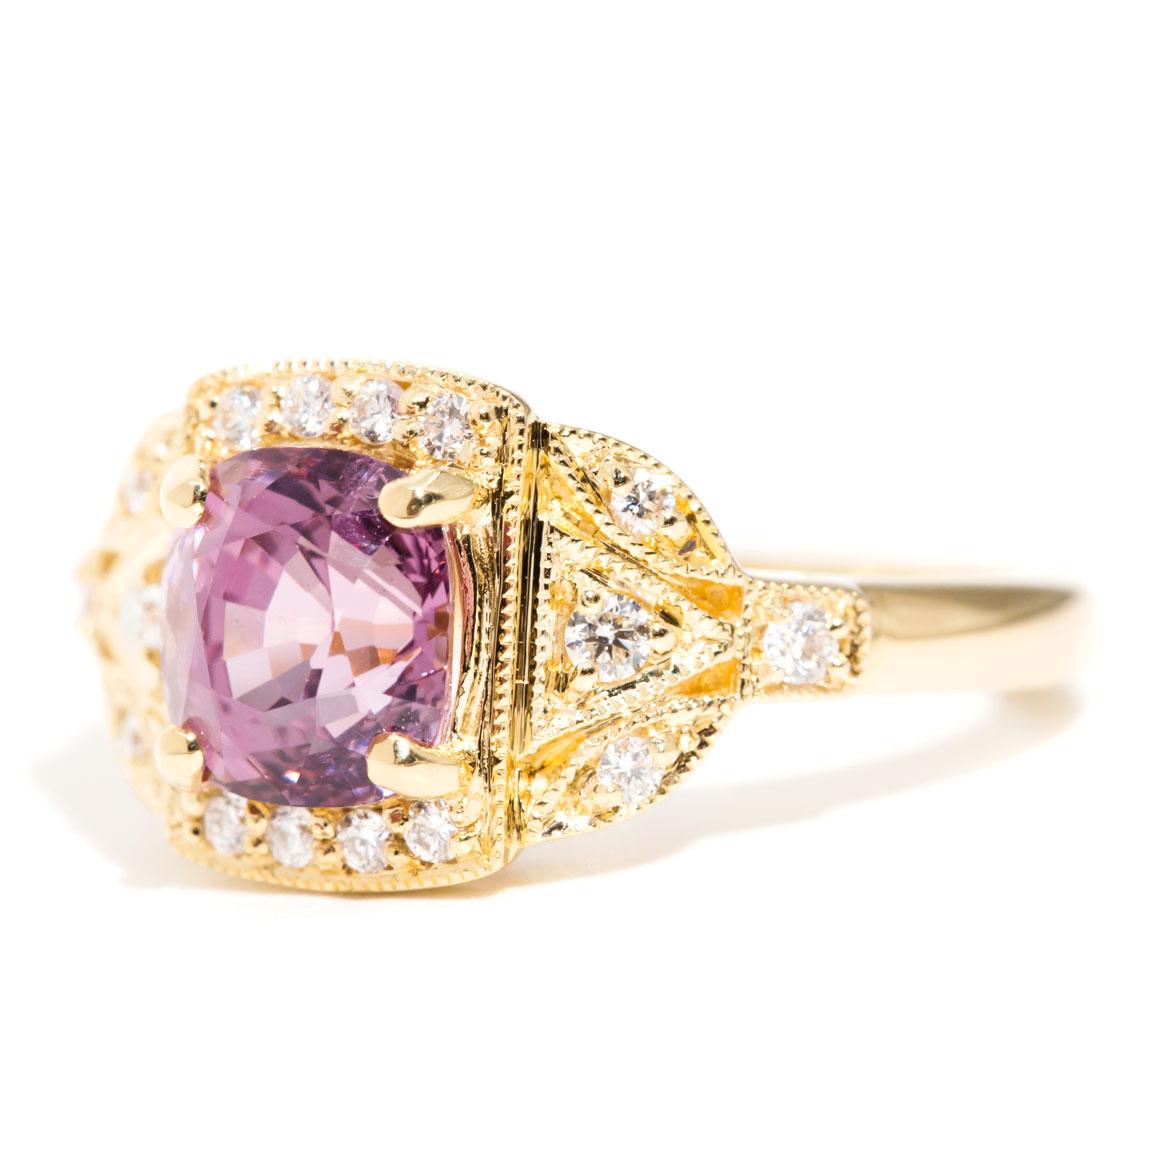 1.92 Carat Cushion Cut Pink Spinel and Diamond 18 Carat Yellow Gold Cluster Ring 2